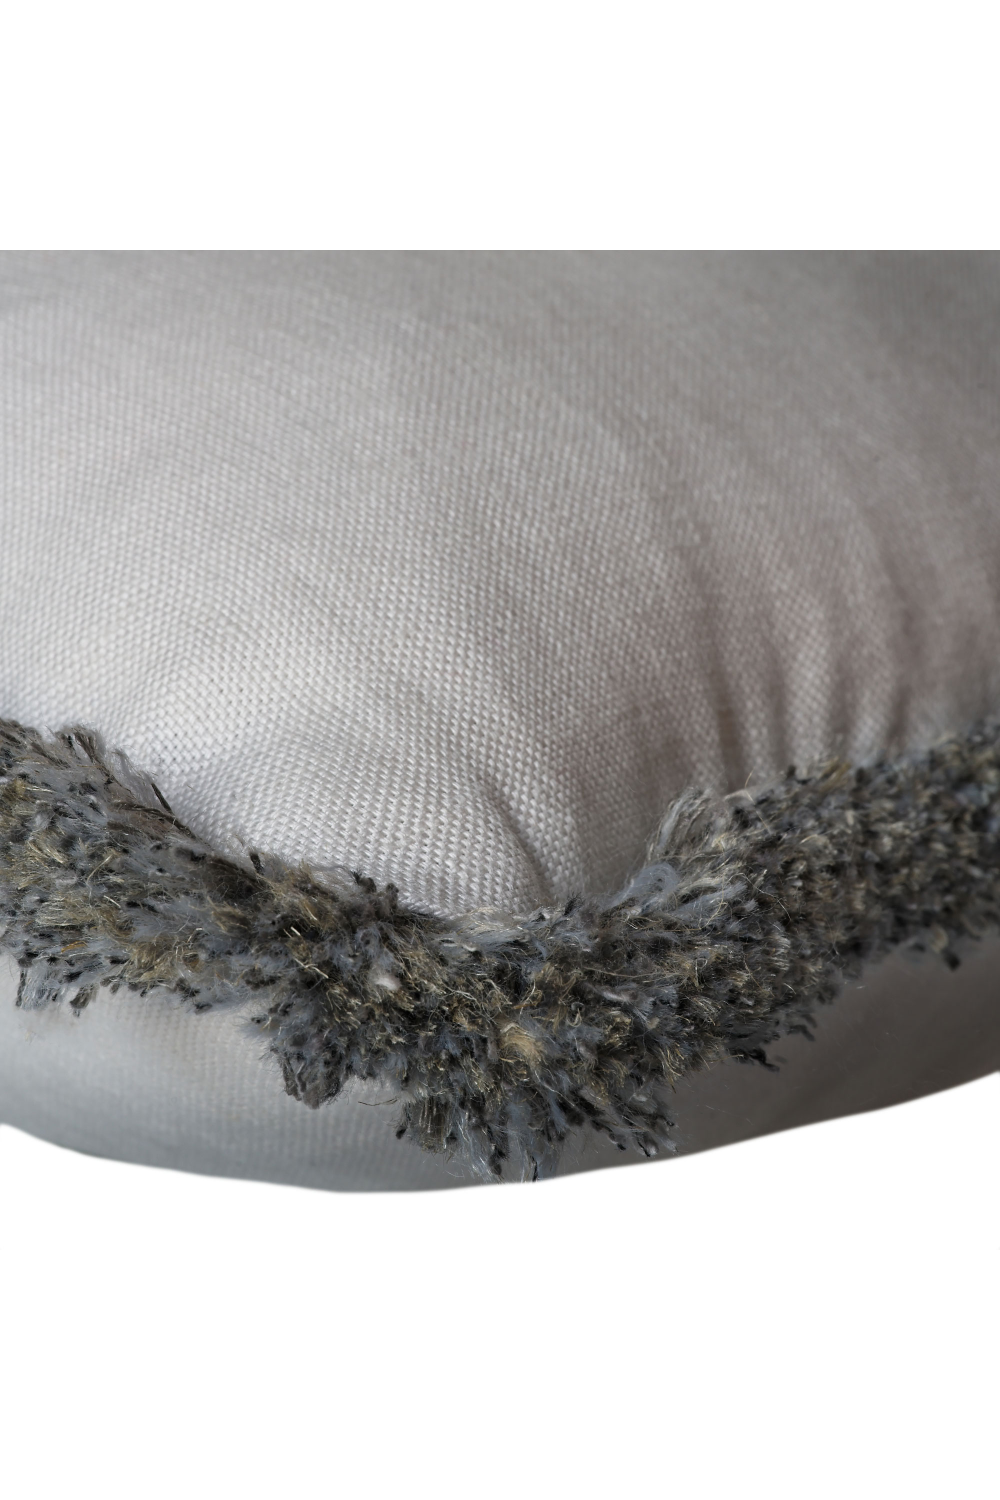 White Linen Cushion with Silvery Gray Fringe | Andrew Martin Beagle